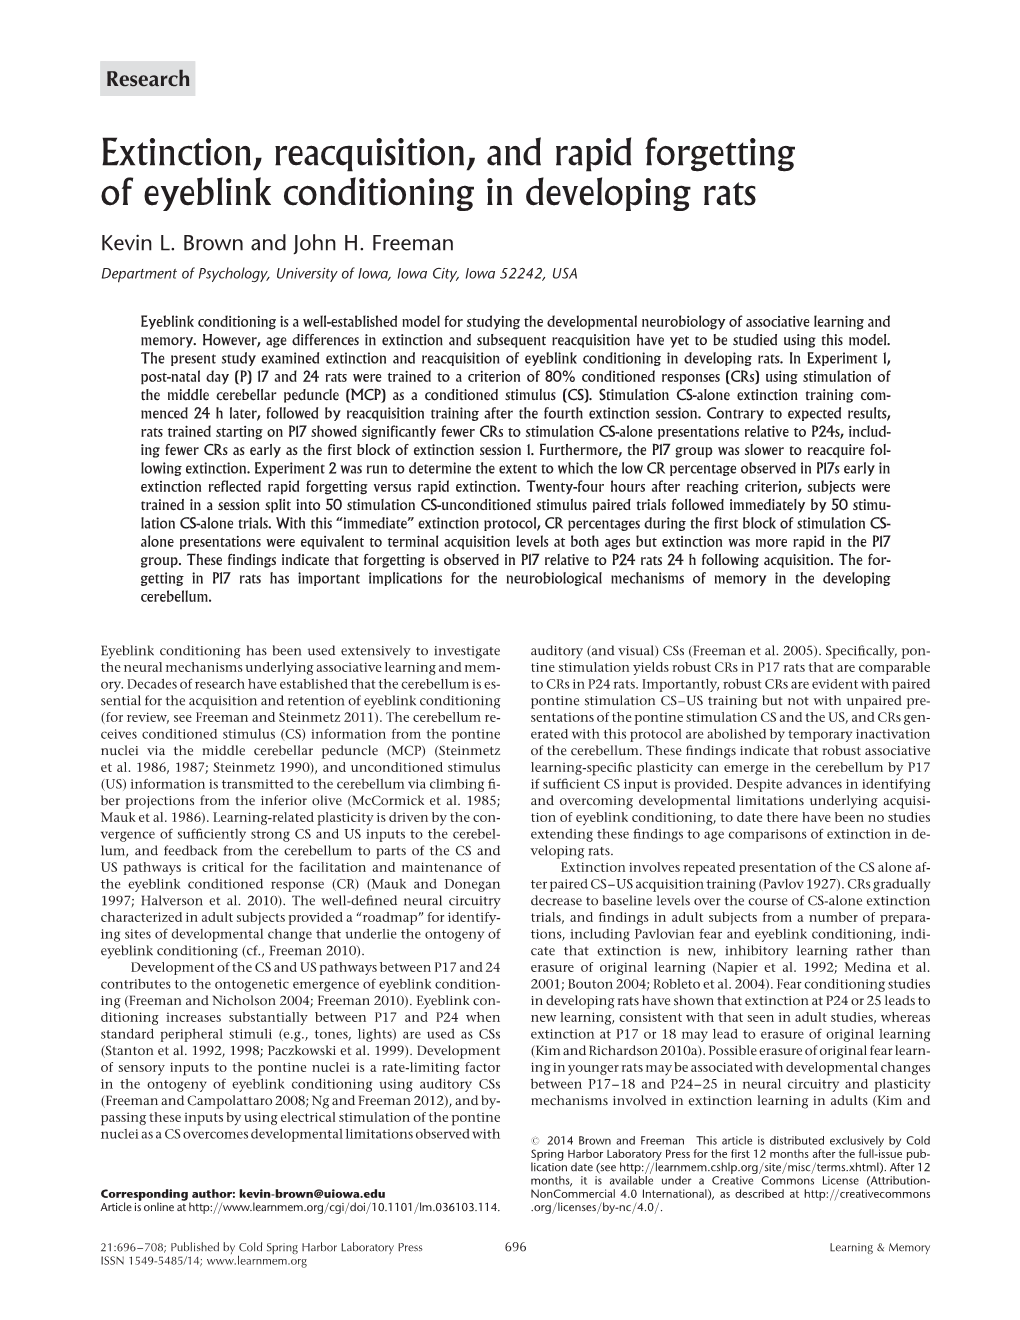 Extinction, Reacquisition, and Rapid Forgetting of Eyeblink Conditioning in Developing Rats